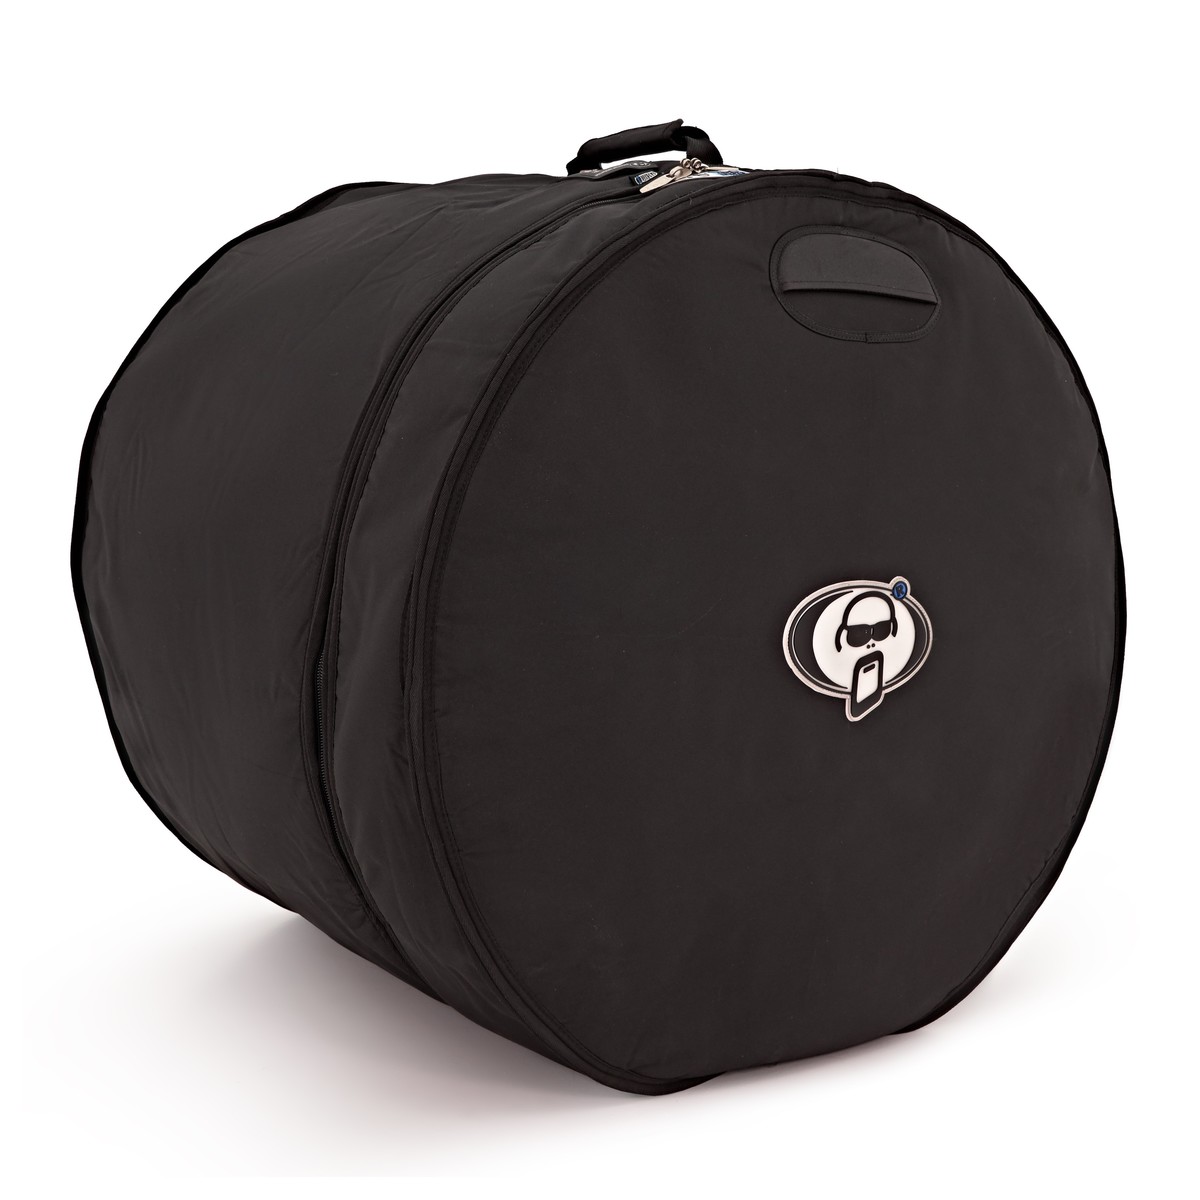 An image of Protection Racket 22x22 Bass Drum Case | PMT Online